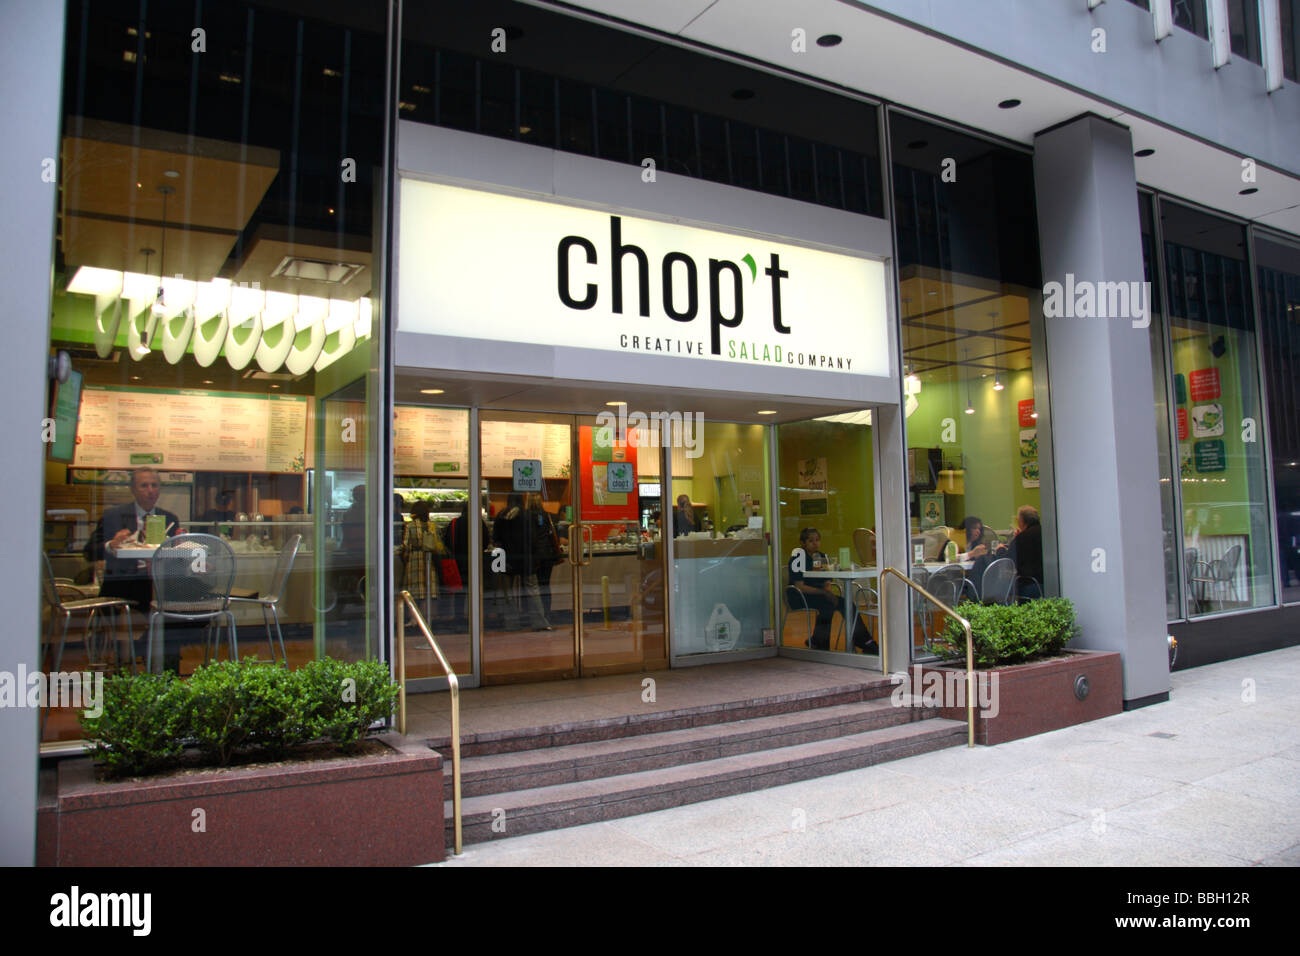 The shop front of the chop't creative salad restaurant, New York City, United States. Stock Photo